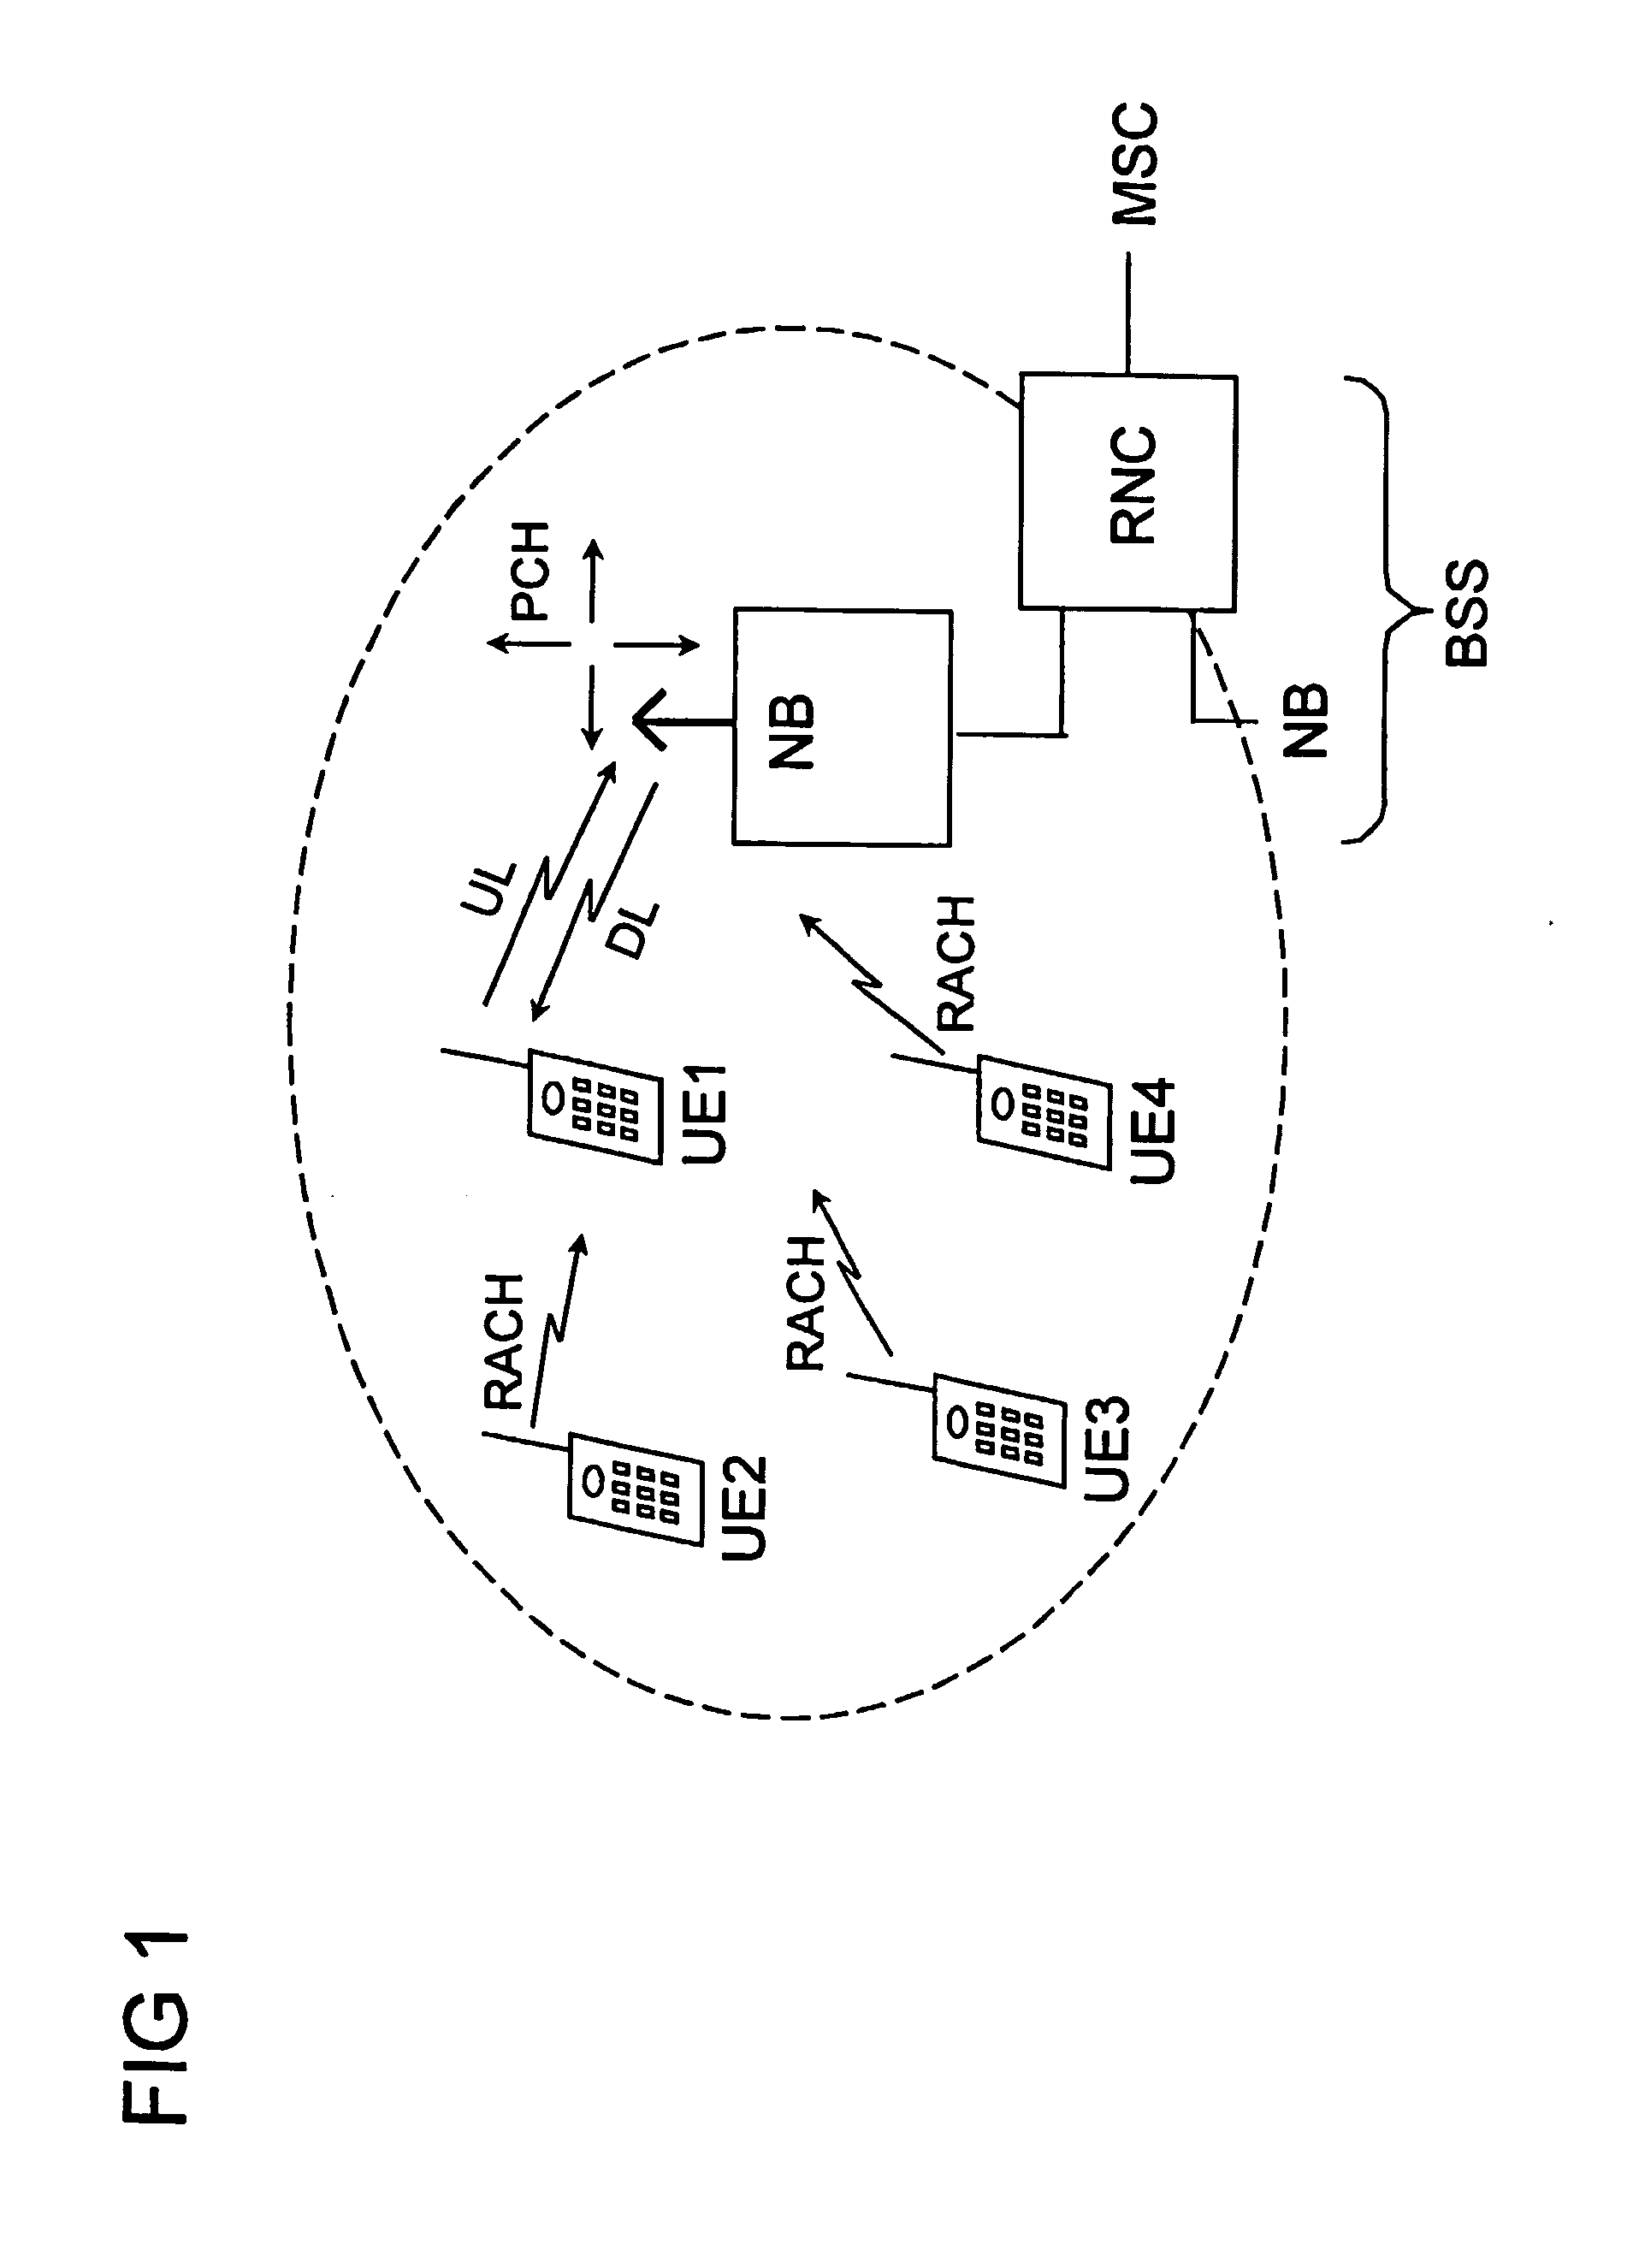 Method for uplink access transmissions in a radio communication system